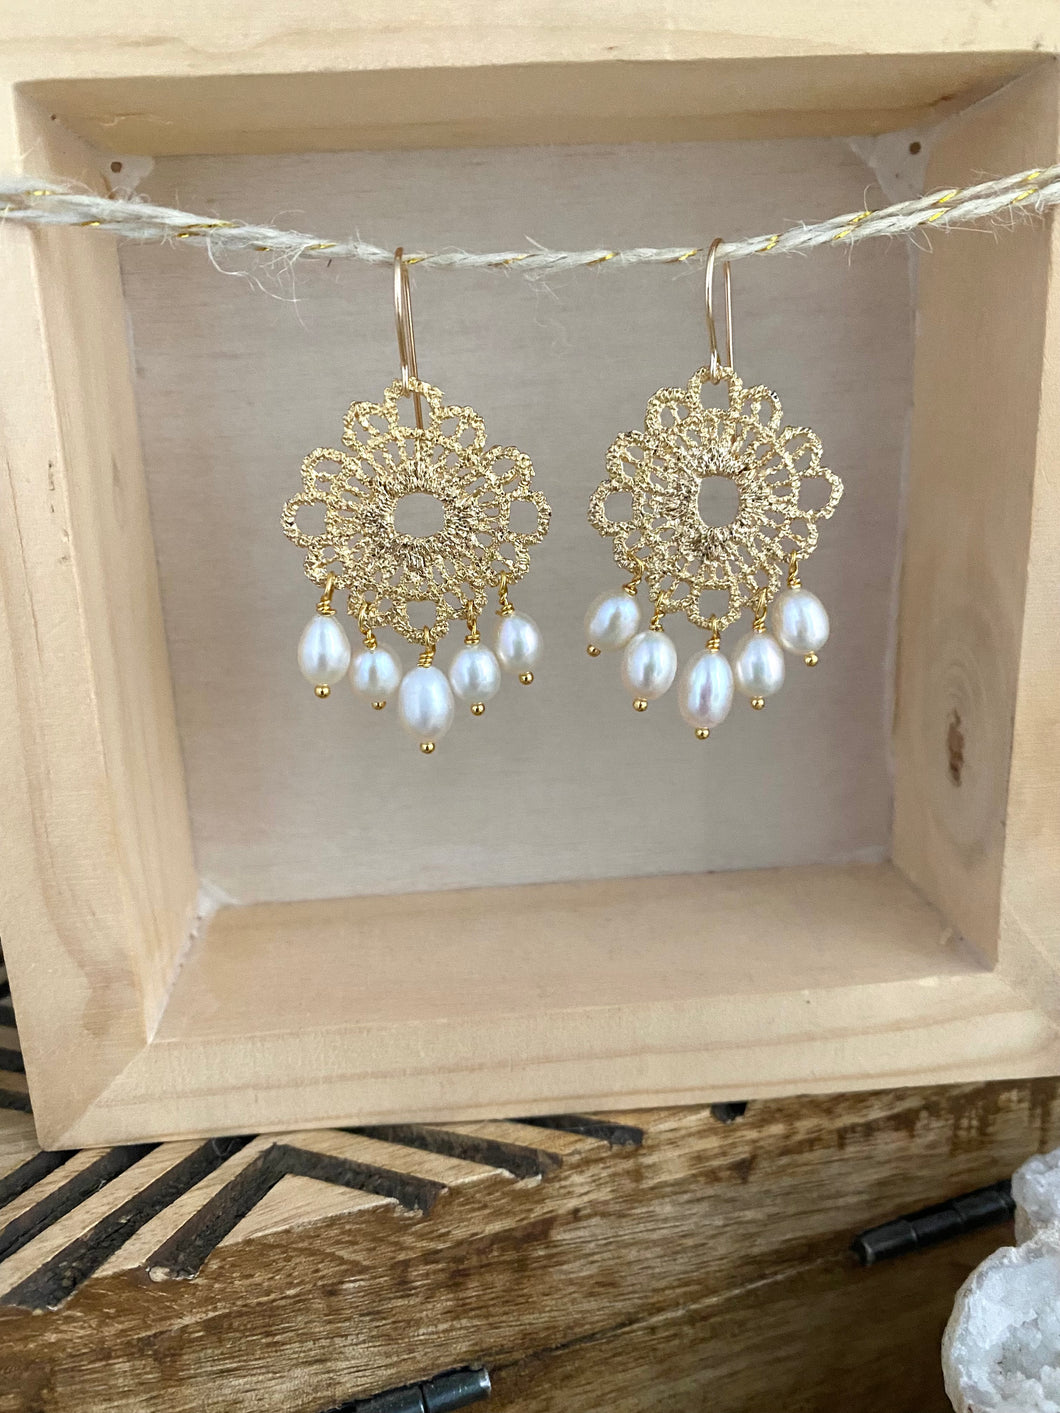 Gold Lace Earrings with WHite Pearl Drops - 14k gold filled ear wires